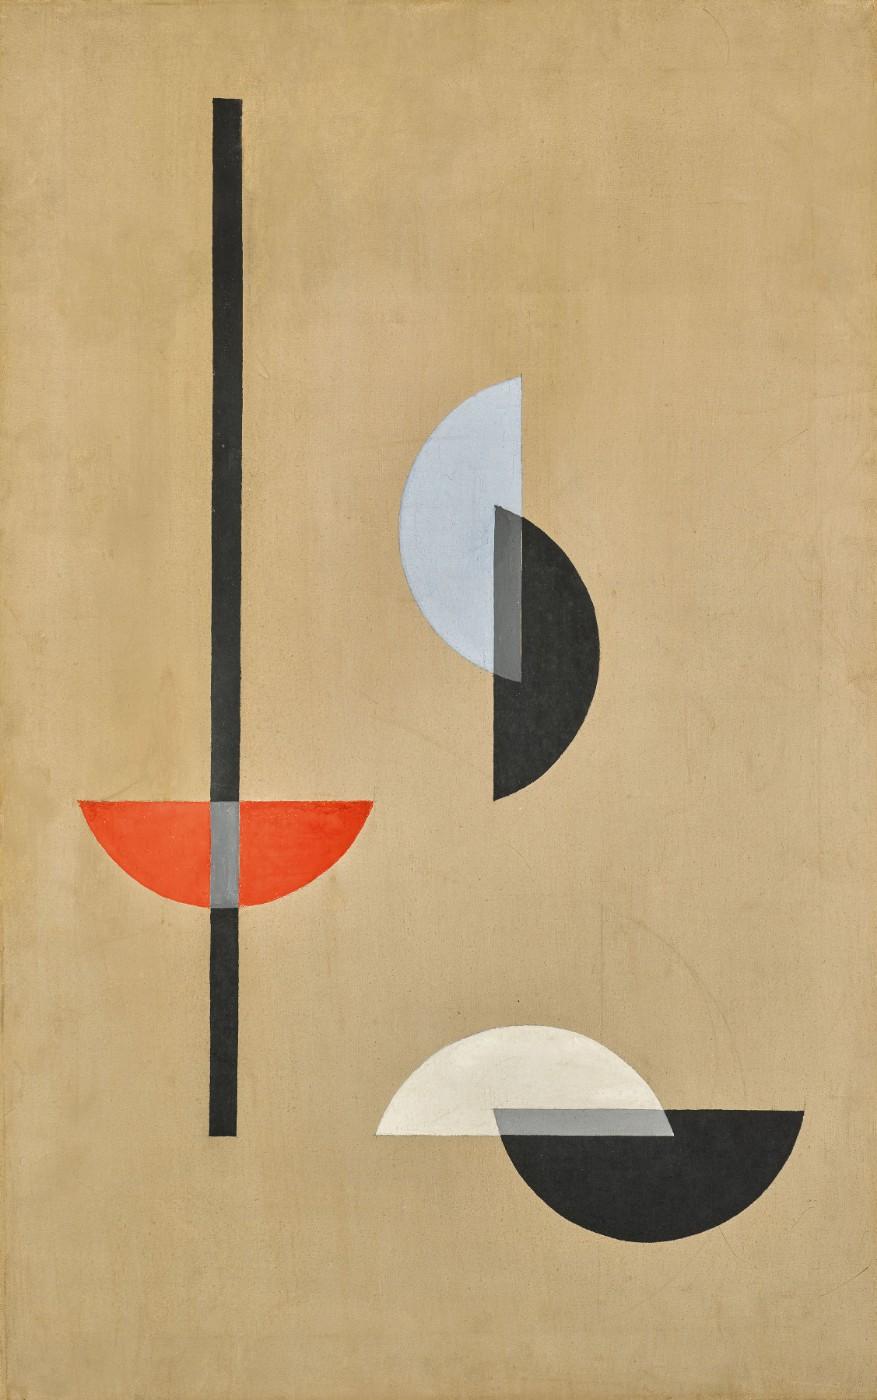  Bauhaus  at 100 Sotheby s Celebrates the Artists their 